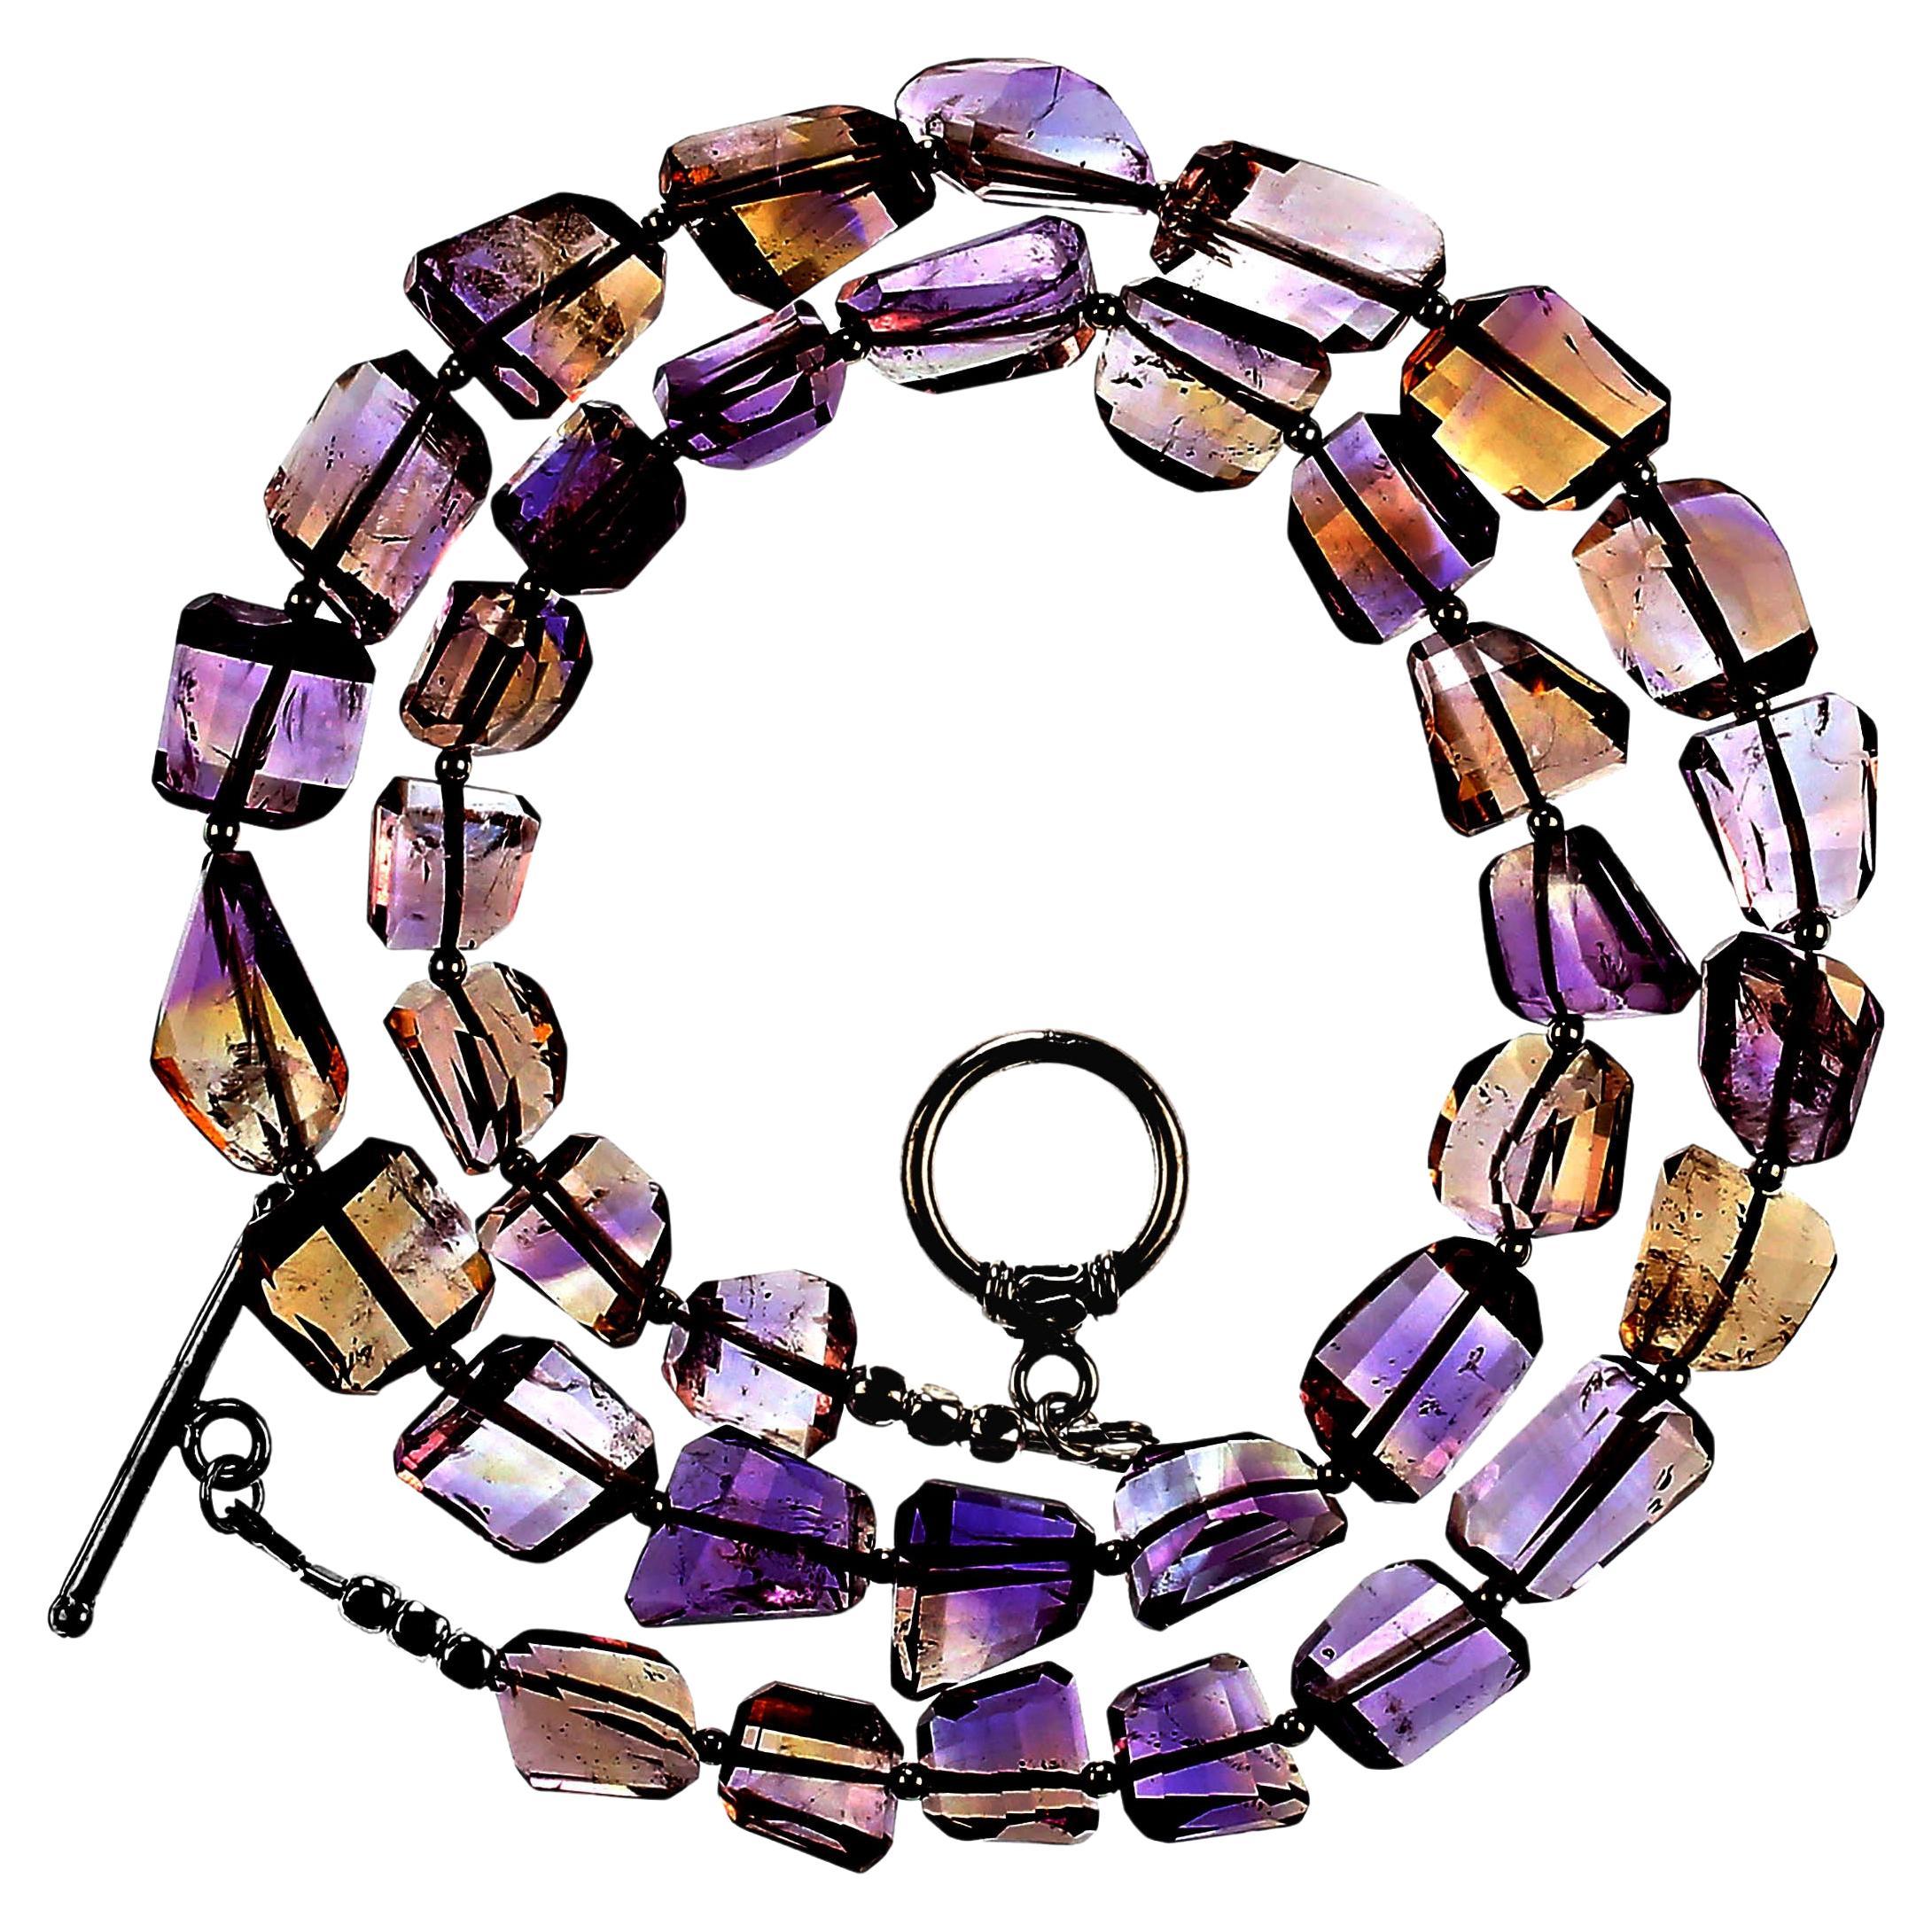 AJD Fascinating Faceted Freeform Ametrine 20 Inch Necklace  Great Gift! For Sale